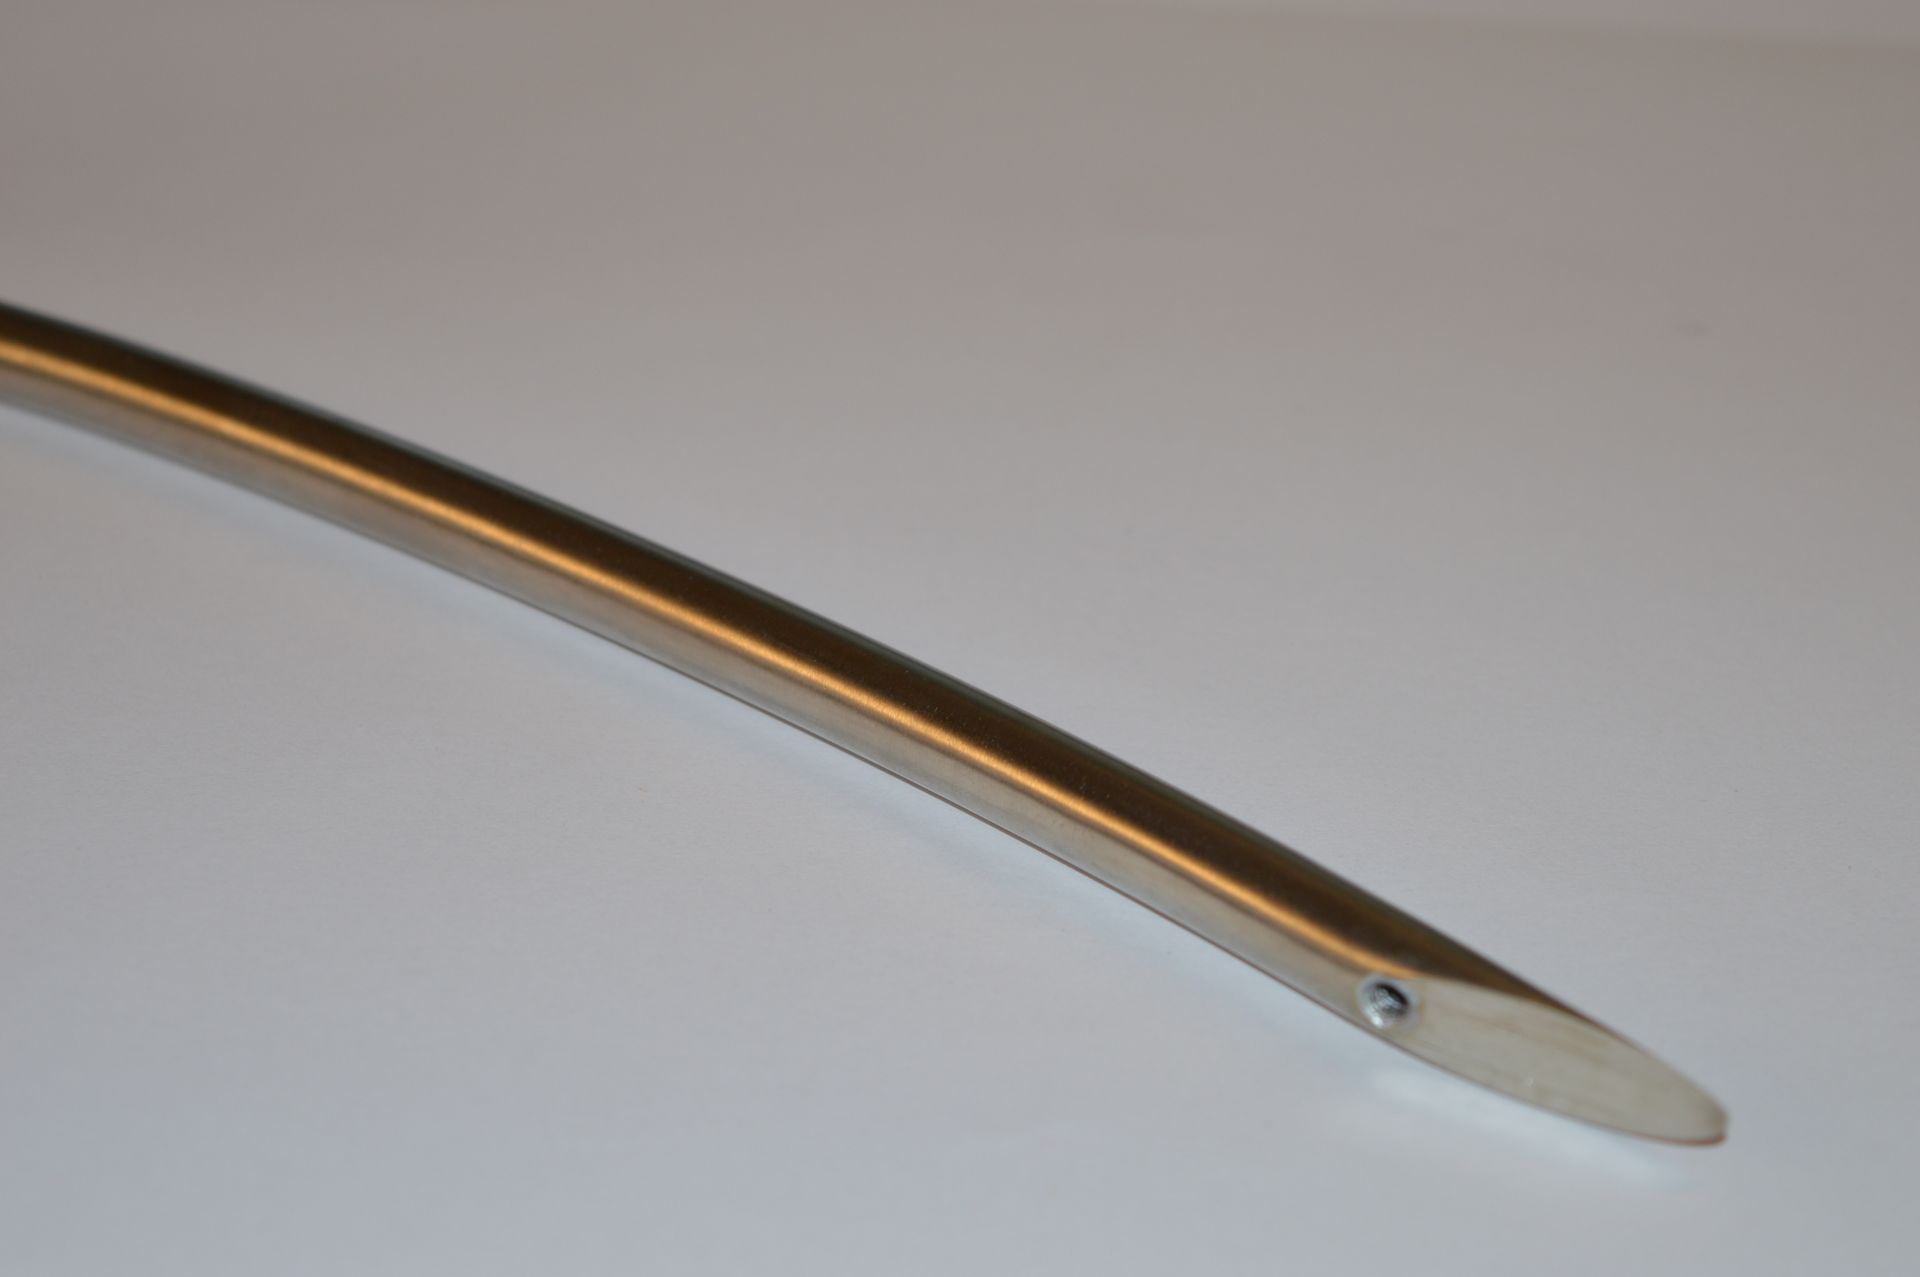 200 x Contemporary Cabinet Door Handles - Stunning Brushed Nickel Finish With Bow Design - CL003 - - Image 5 of 6